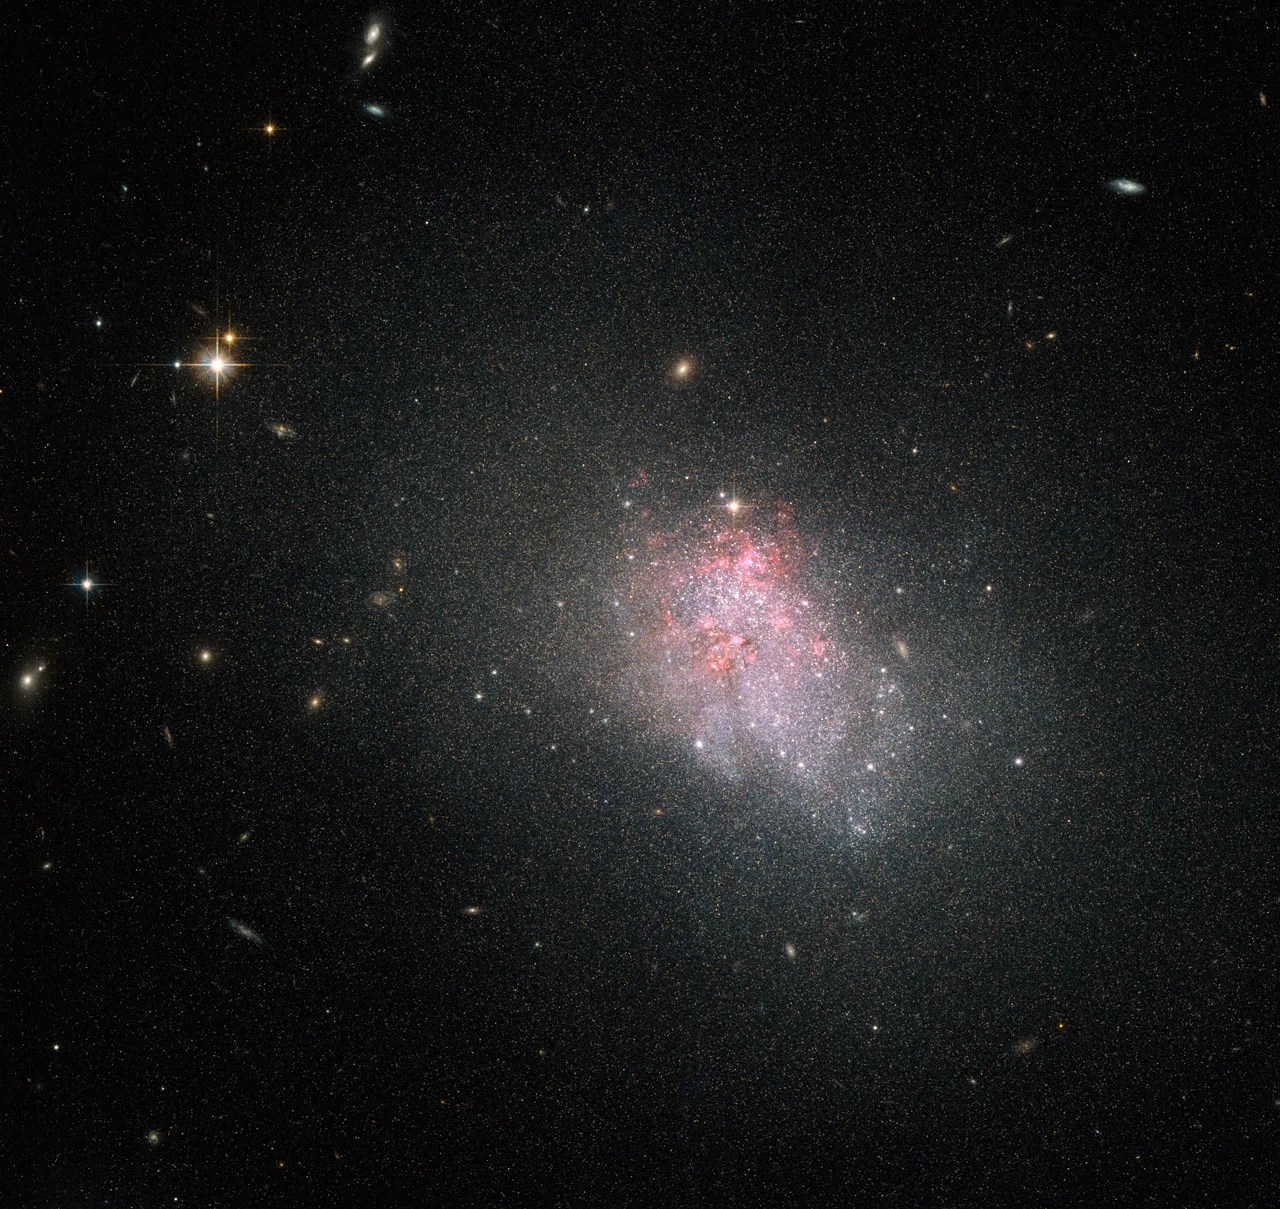 Hubble Sees Violent Star Formation Episodes in Dwarf Galaxies - NASA Science